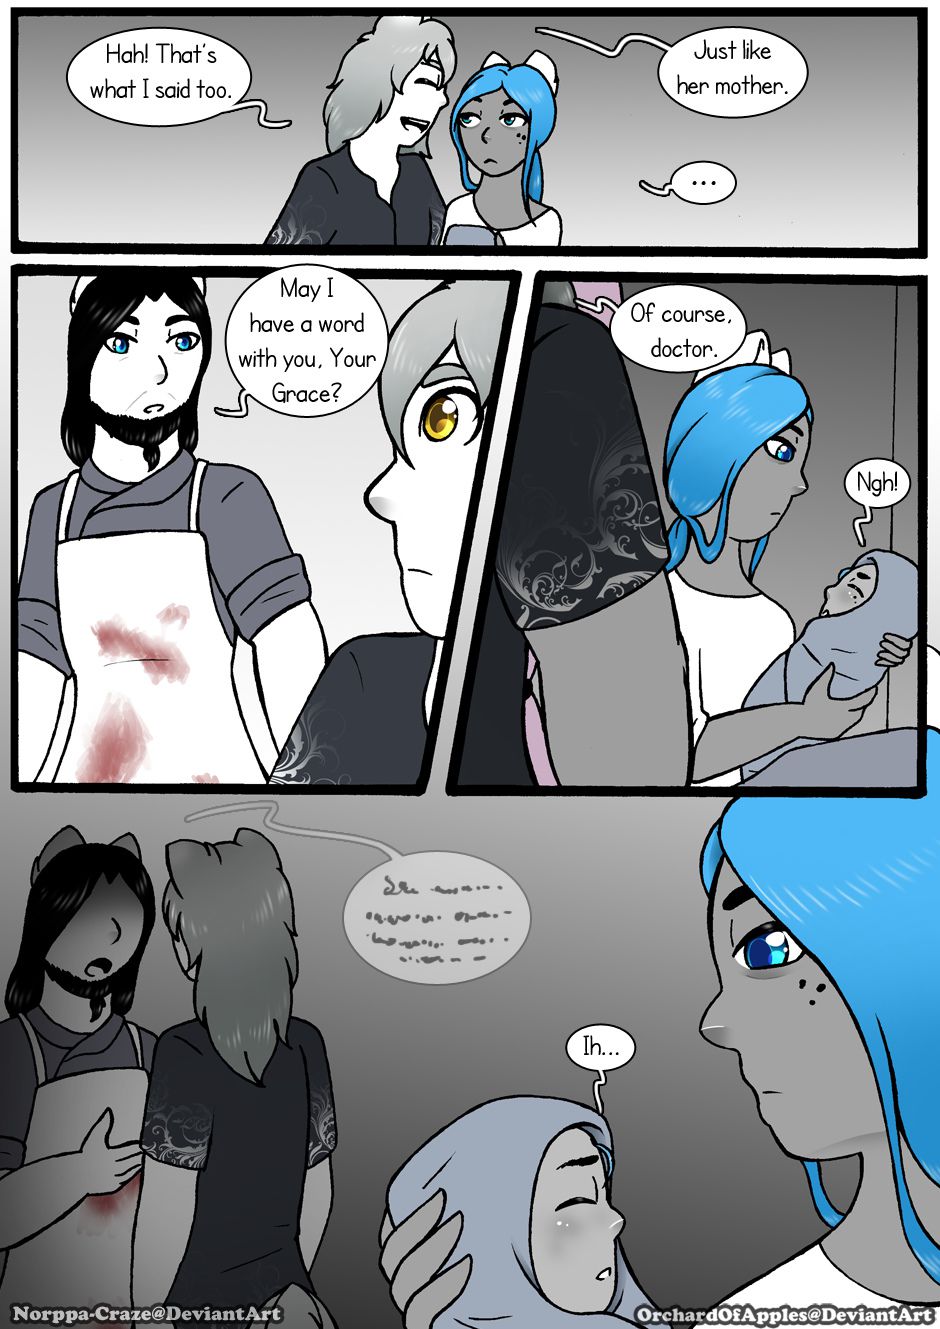 [Jeny-jen94] Between Kings and Queens [Ongoing] 334